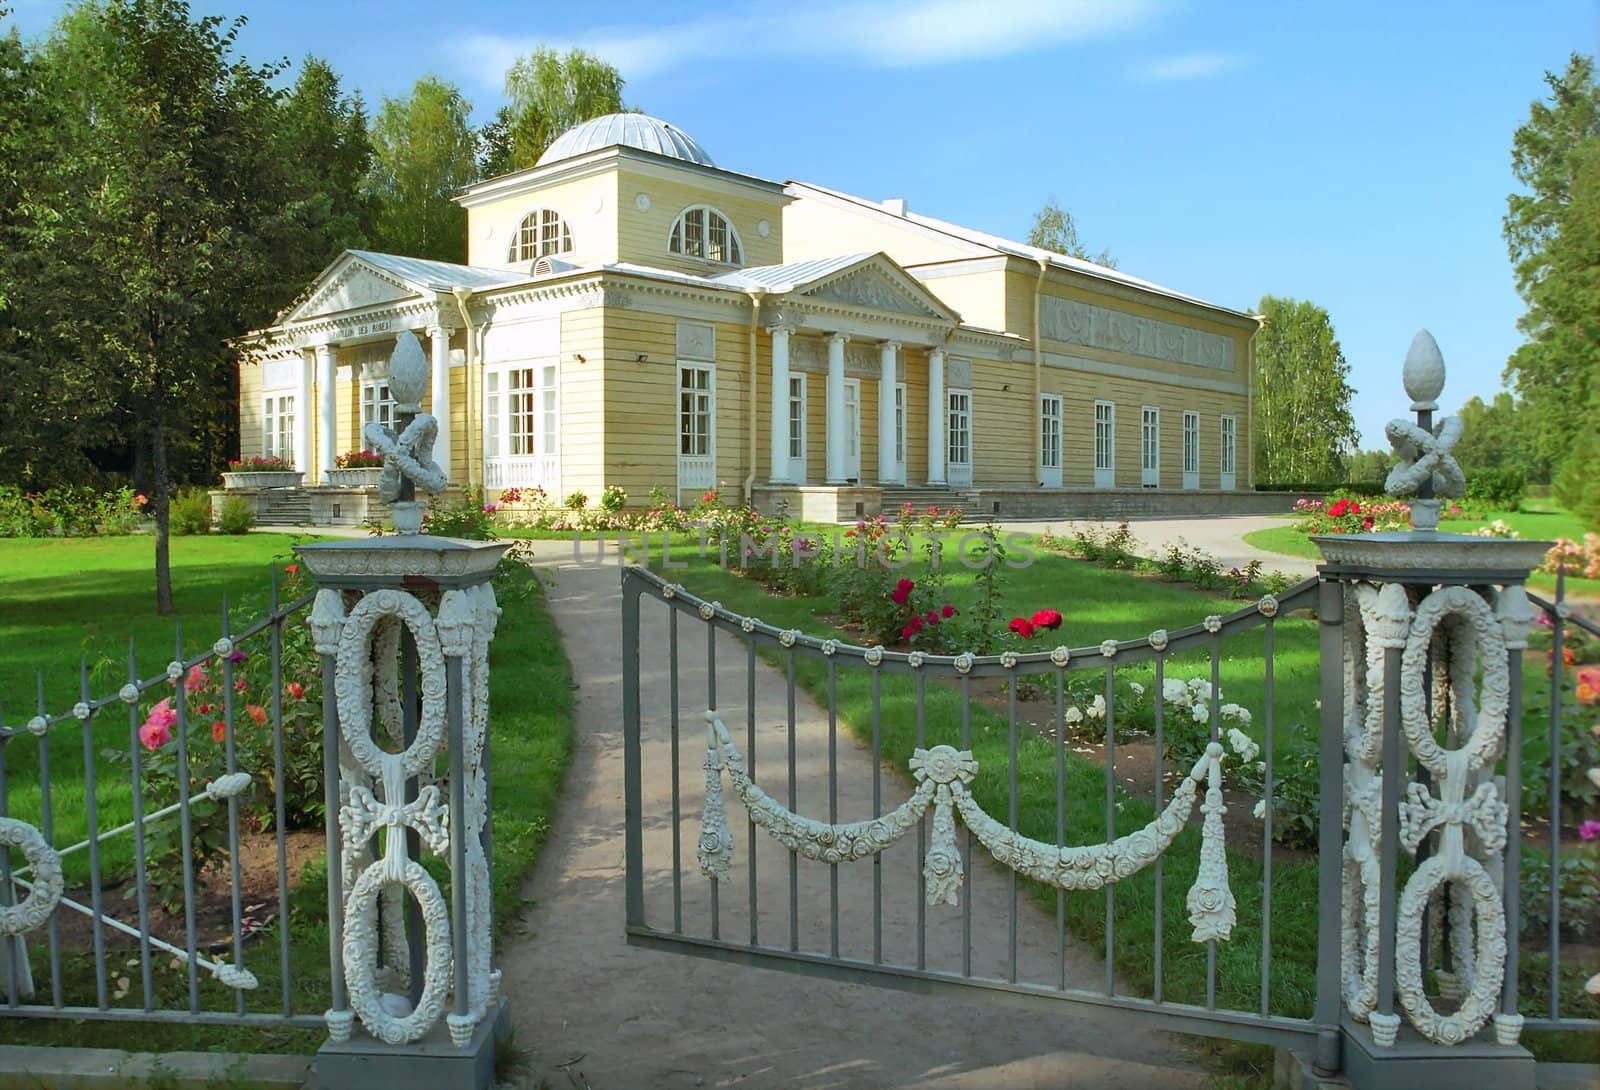 Enter to the rose garden and classical building  